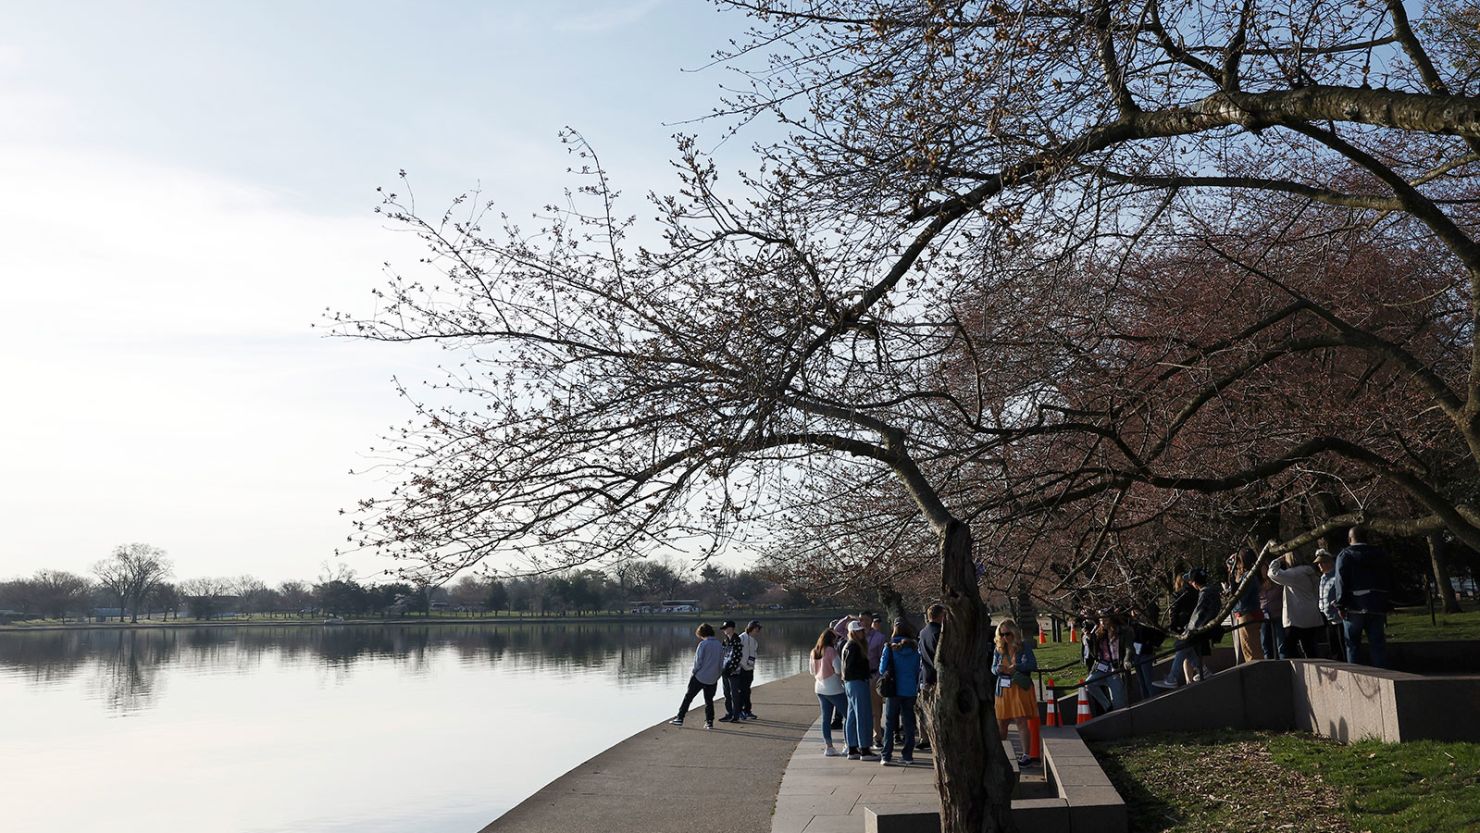 A student tour group walks past the cherry blossom trees on the Tidal Basin on March 14, 2024, in Washington, DC. The National Park Service announced this week that it will begin to remove some cherry blossom trees around the Tidal Basin and West Potomac Park in order to construct a sea wall to guard against flooding.